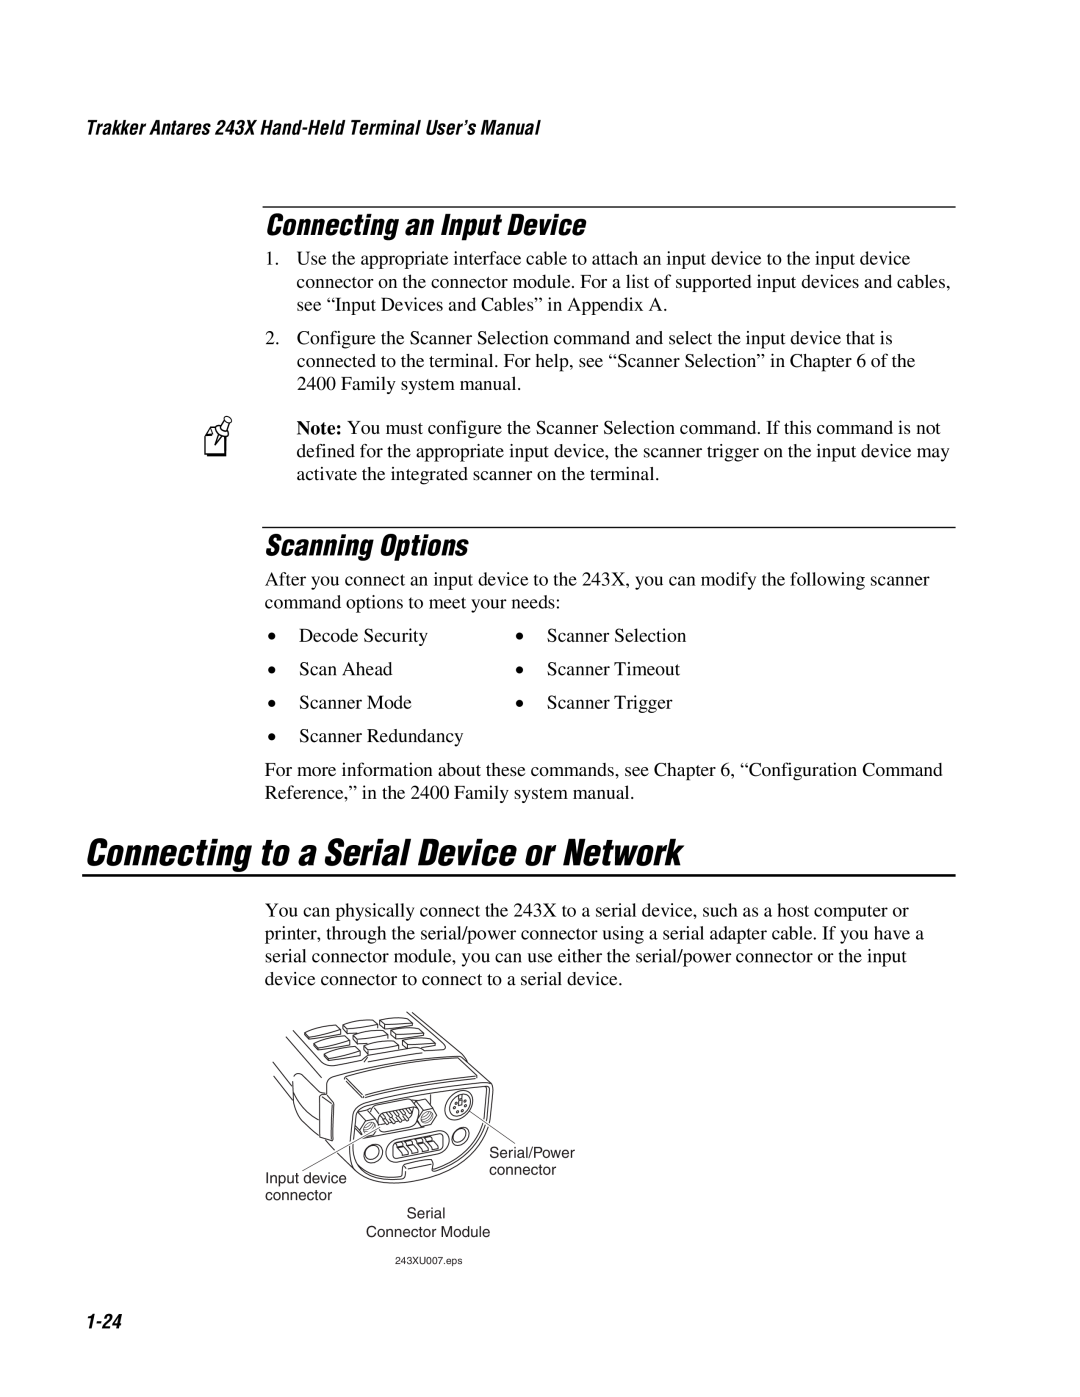 IBM 243X user manual Connecting to a Serial Device or Network, Connecting an Input Device, Scanning Options, 1-24 